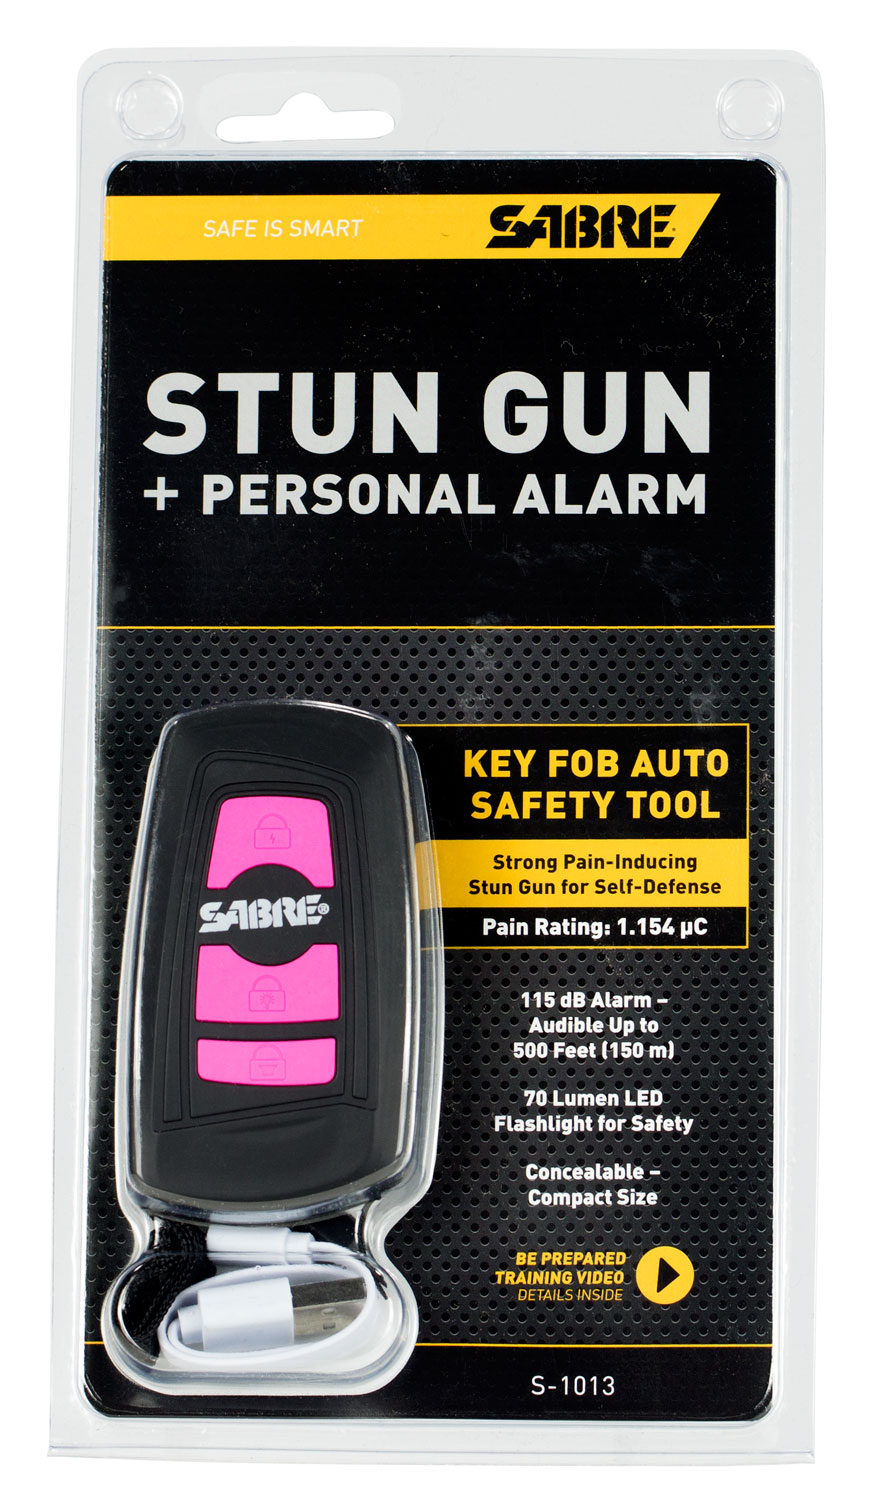 Sabre S1013PK 3-In-1 Stun Gun Safety Tool Pink Polymer 1.15 uC Pain Rating Features Built in Flashlight